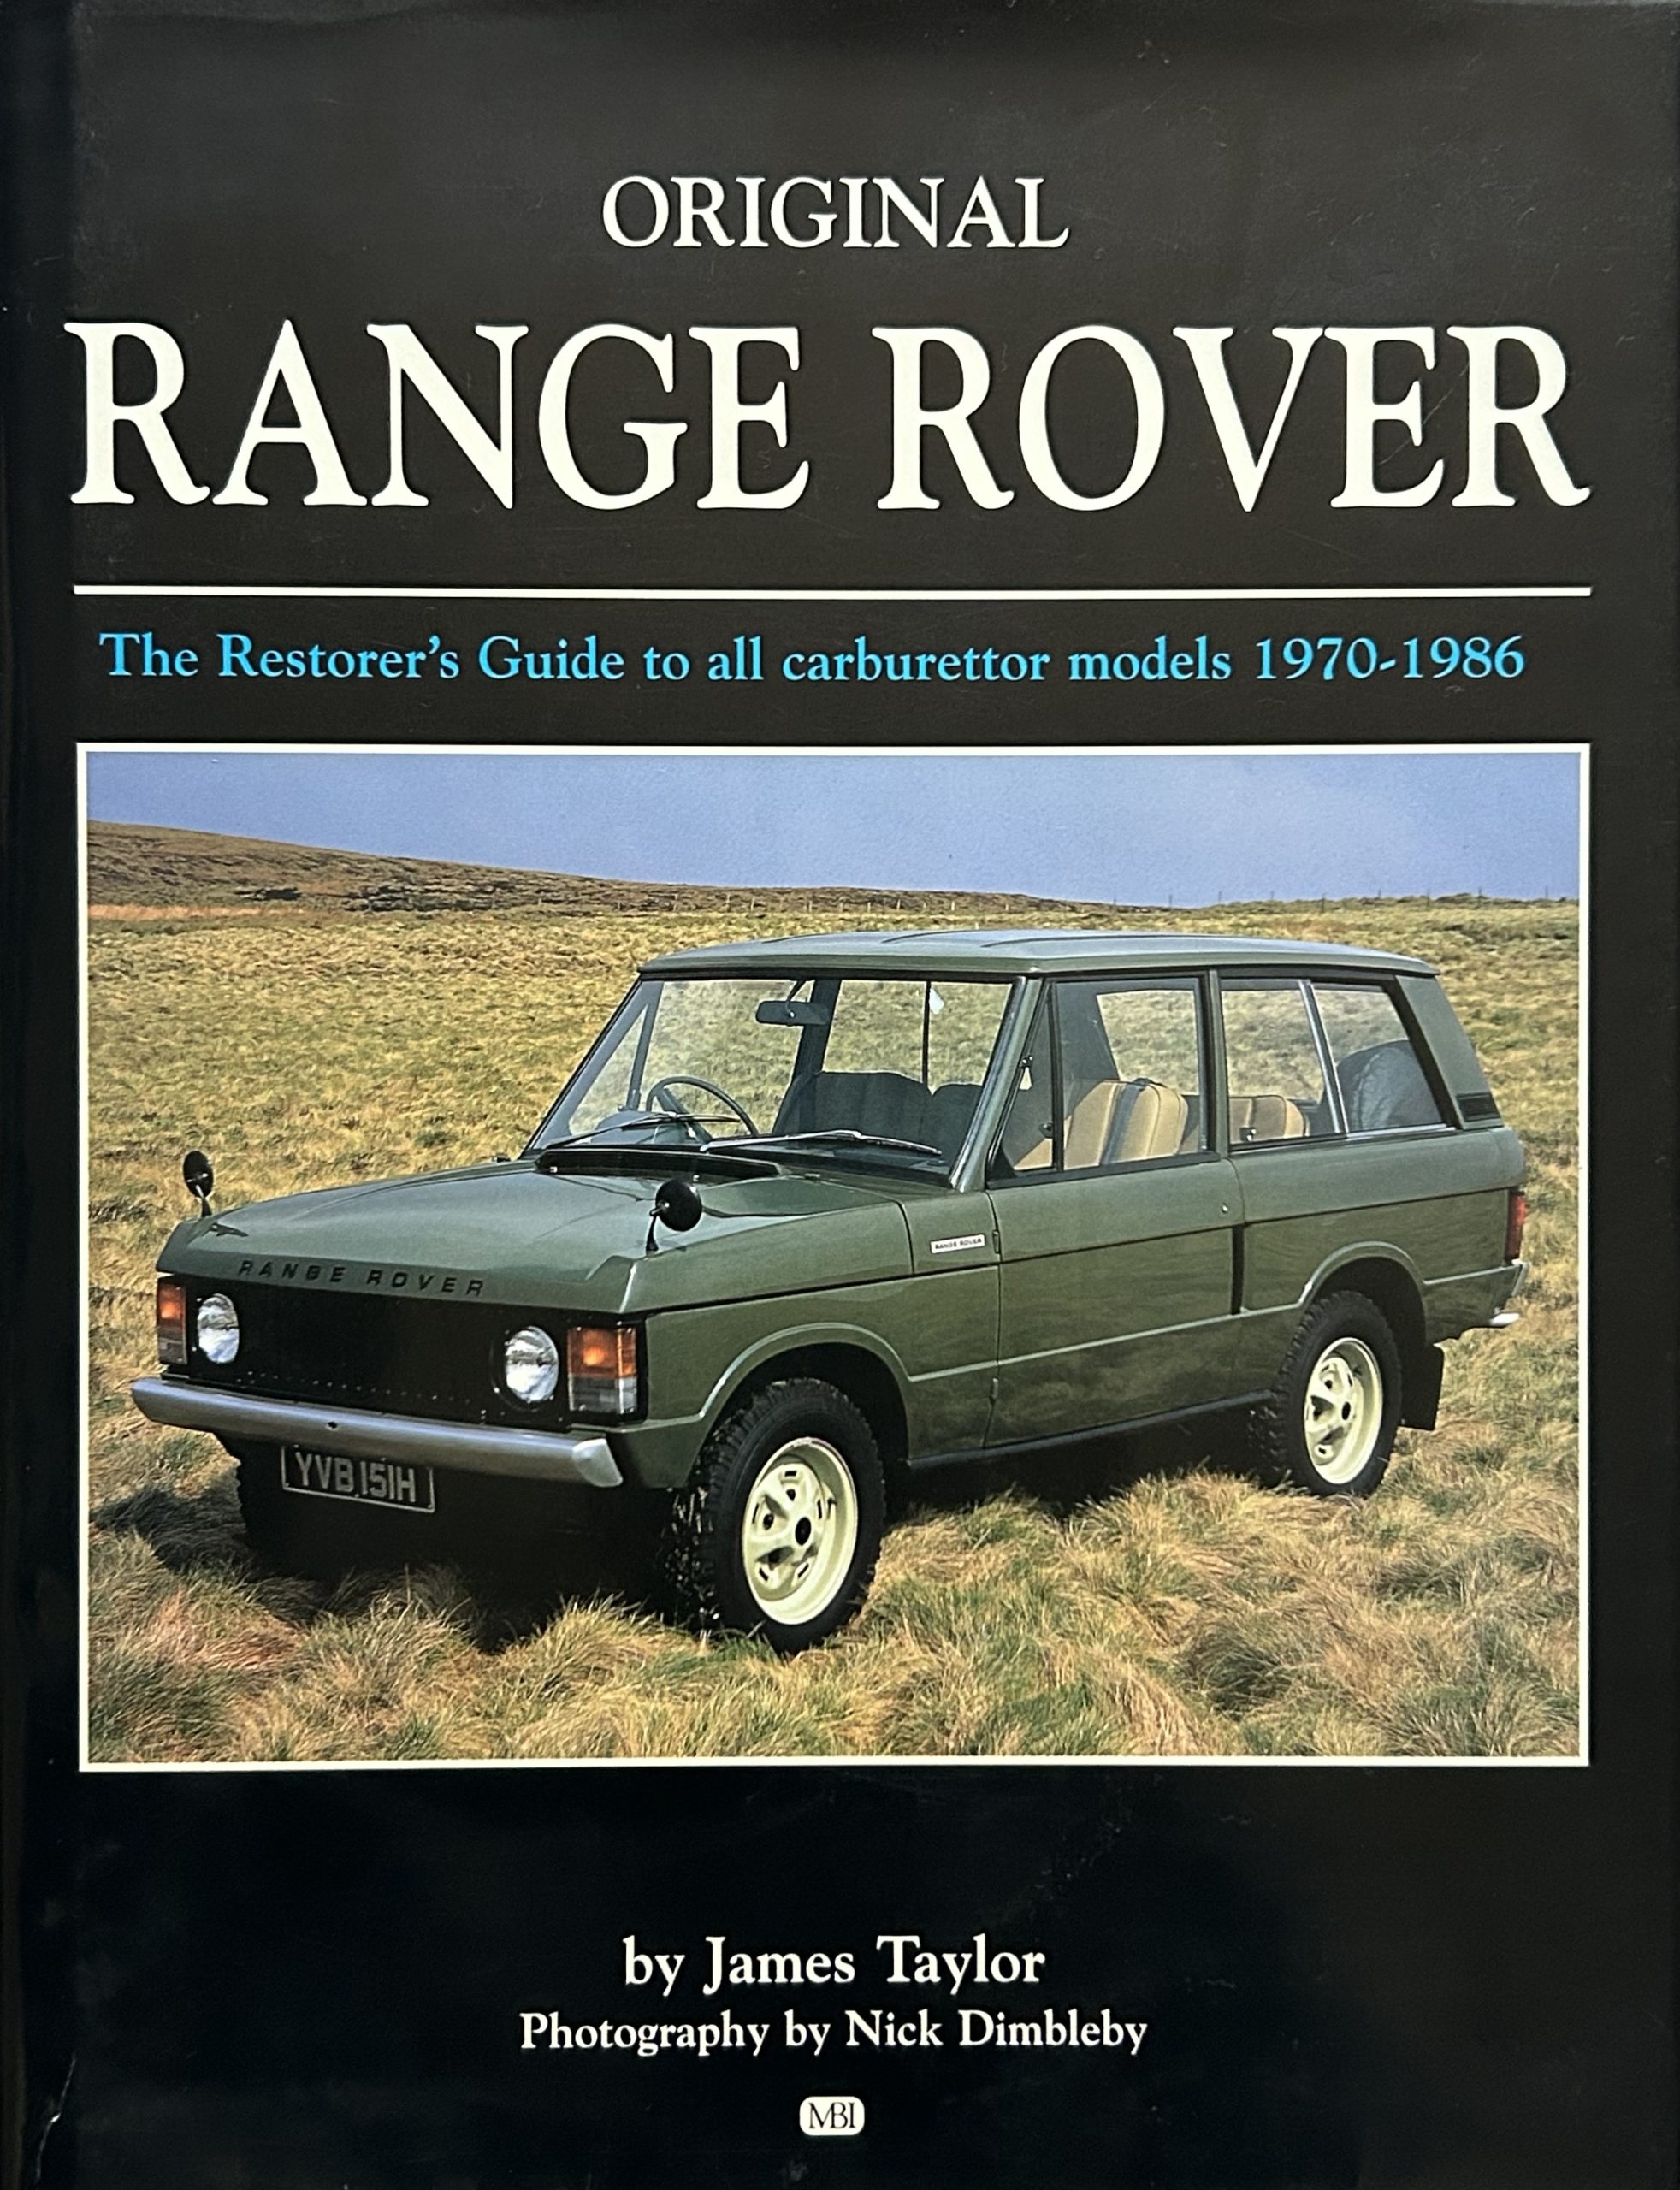 Original Range Rover: The Restorer's Guide to All Carburettor Models 1970-1986 by James Taylor